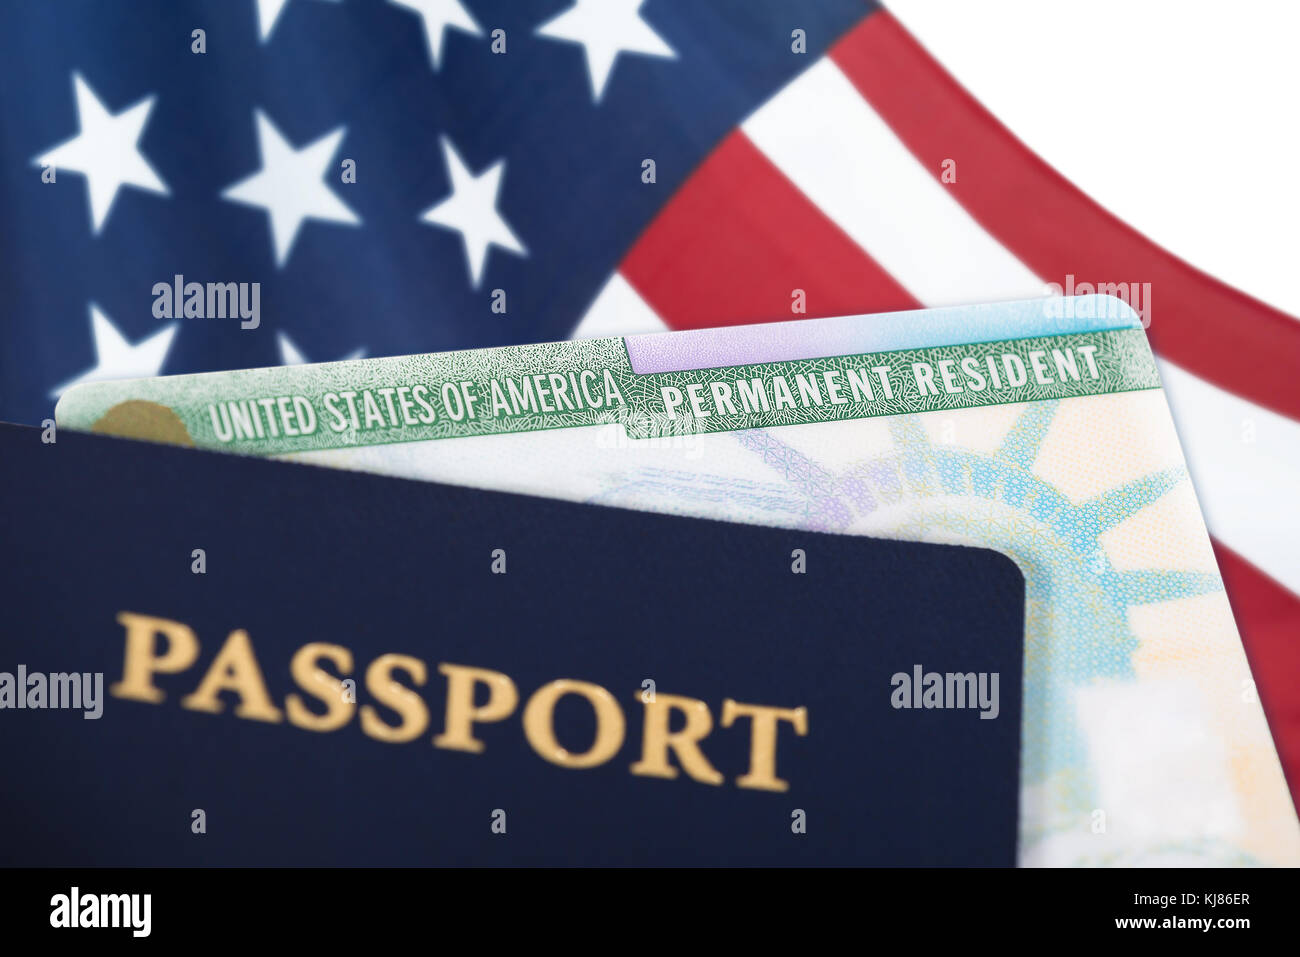 United States of America permanent resident card, green card, displayed with a US flag in the background and a passport in the foreground. Immigration Stock Photo